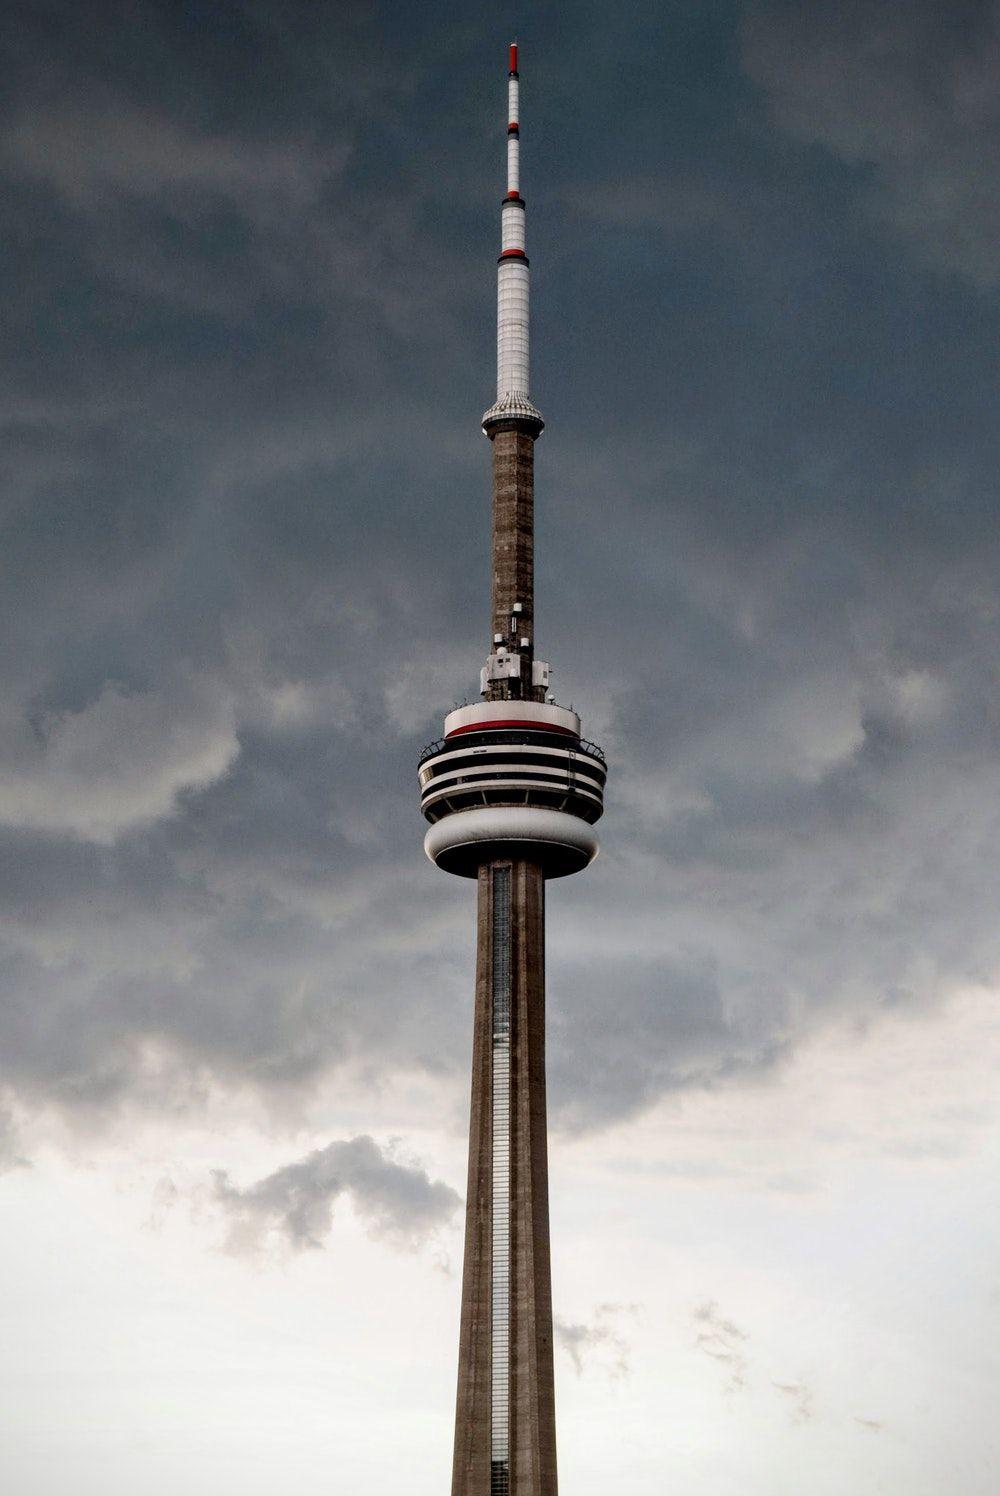 Cn Tower, Toronto, Canada Picture. Download Free Image